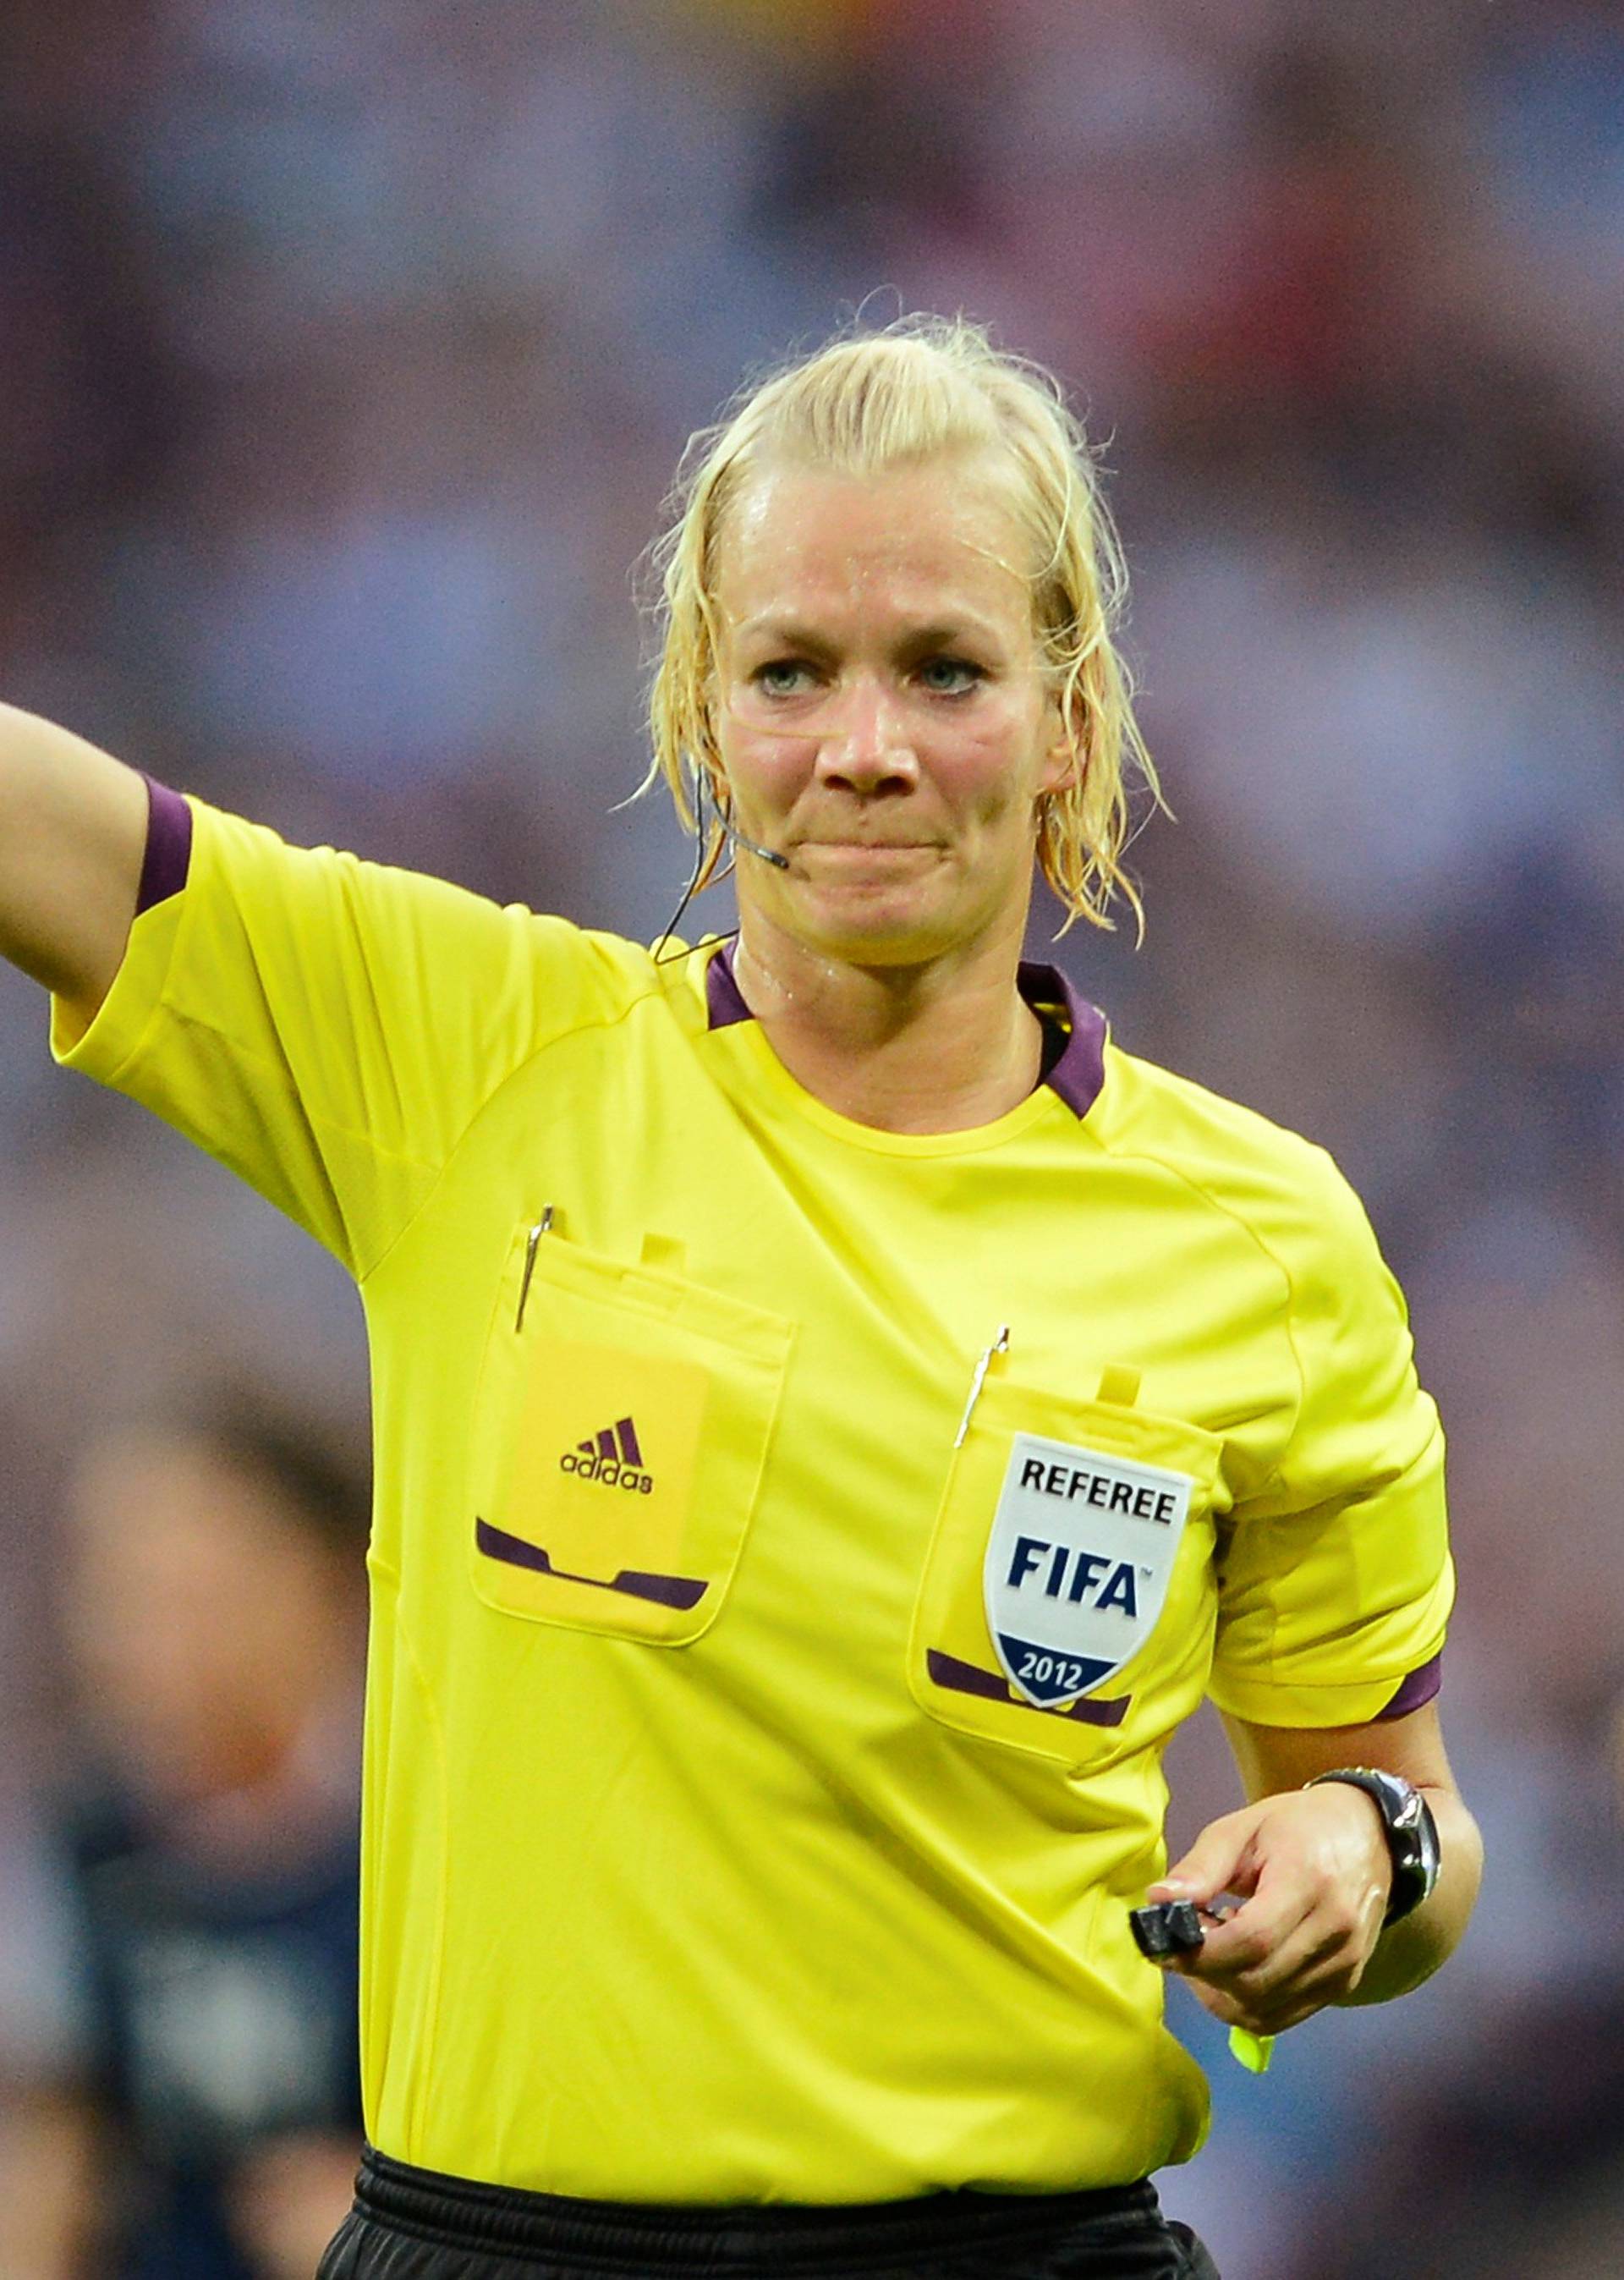 FILE PHOTO: Steinhaus of Germany officiates in the women's final soccer match featuring the U.S. against Japan at the London 2012 Olympic Games in London